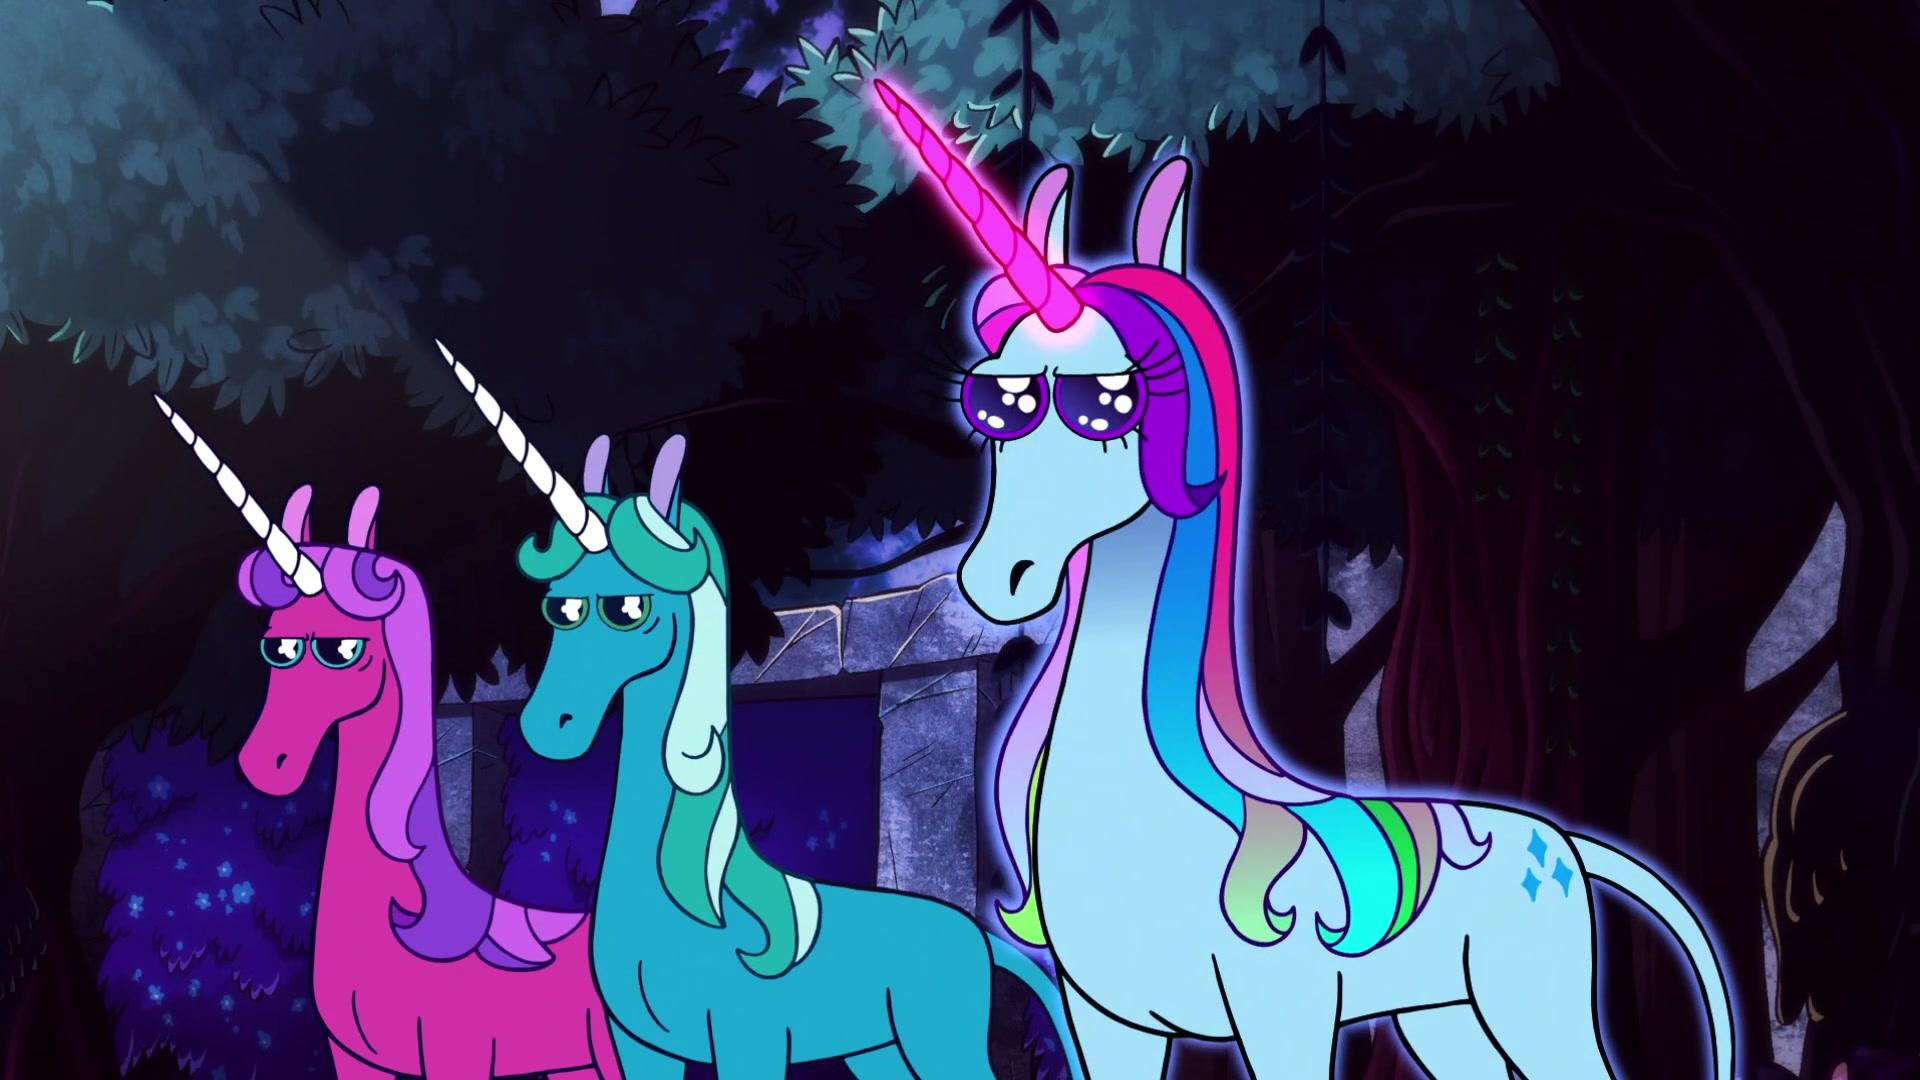 Time management tips make time for "unicorn" projects